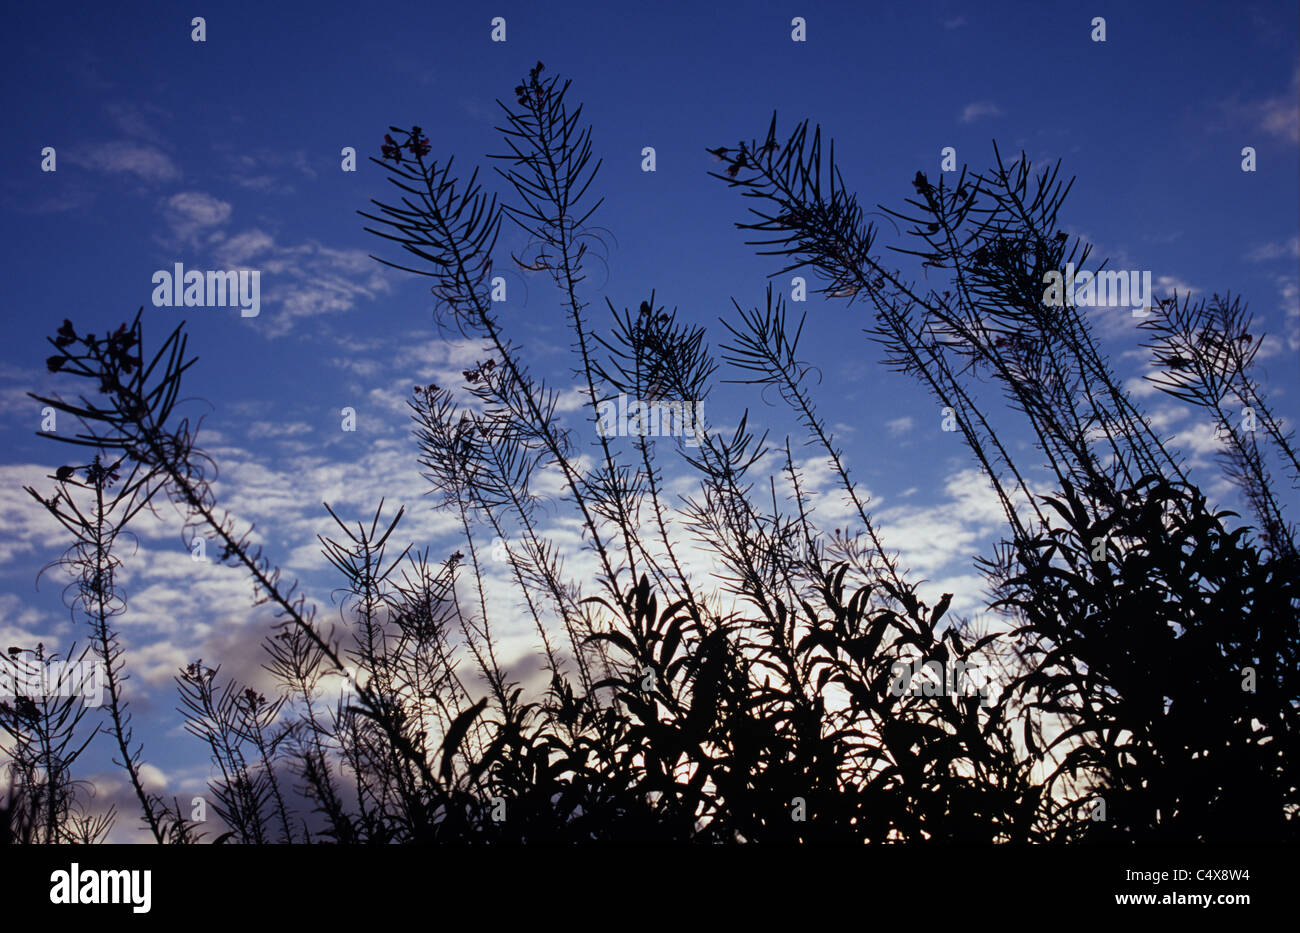 Stems and seed pods with last flowers of Rosebay willowherb or Epilobium angustifolium silhouetted against evening sky Stock Photo